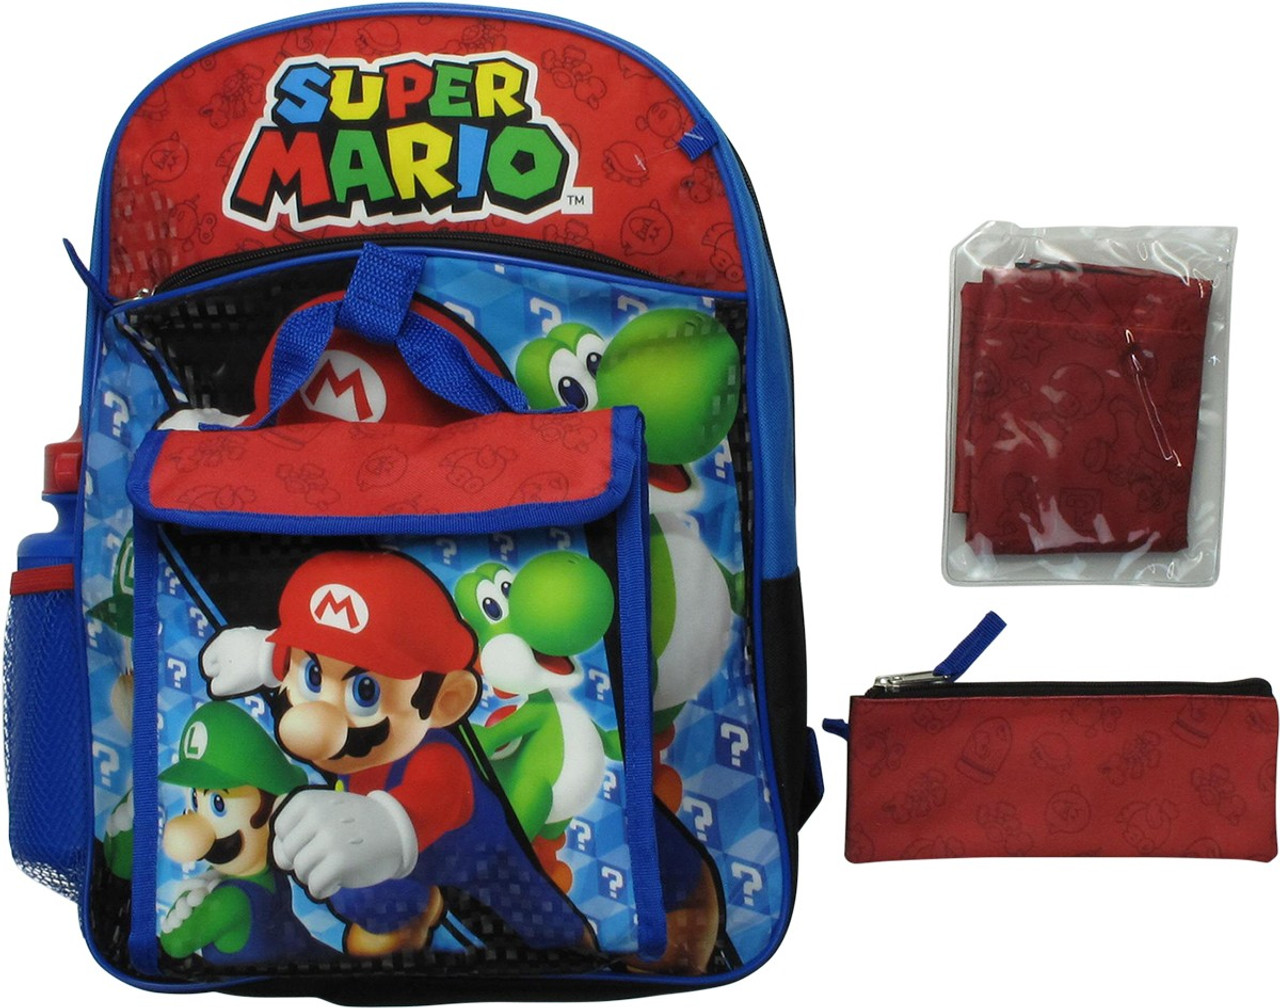 Super Mario Character Lenticular Lunch Bag